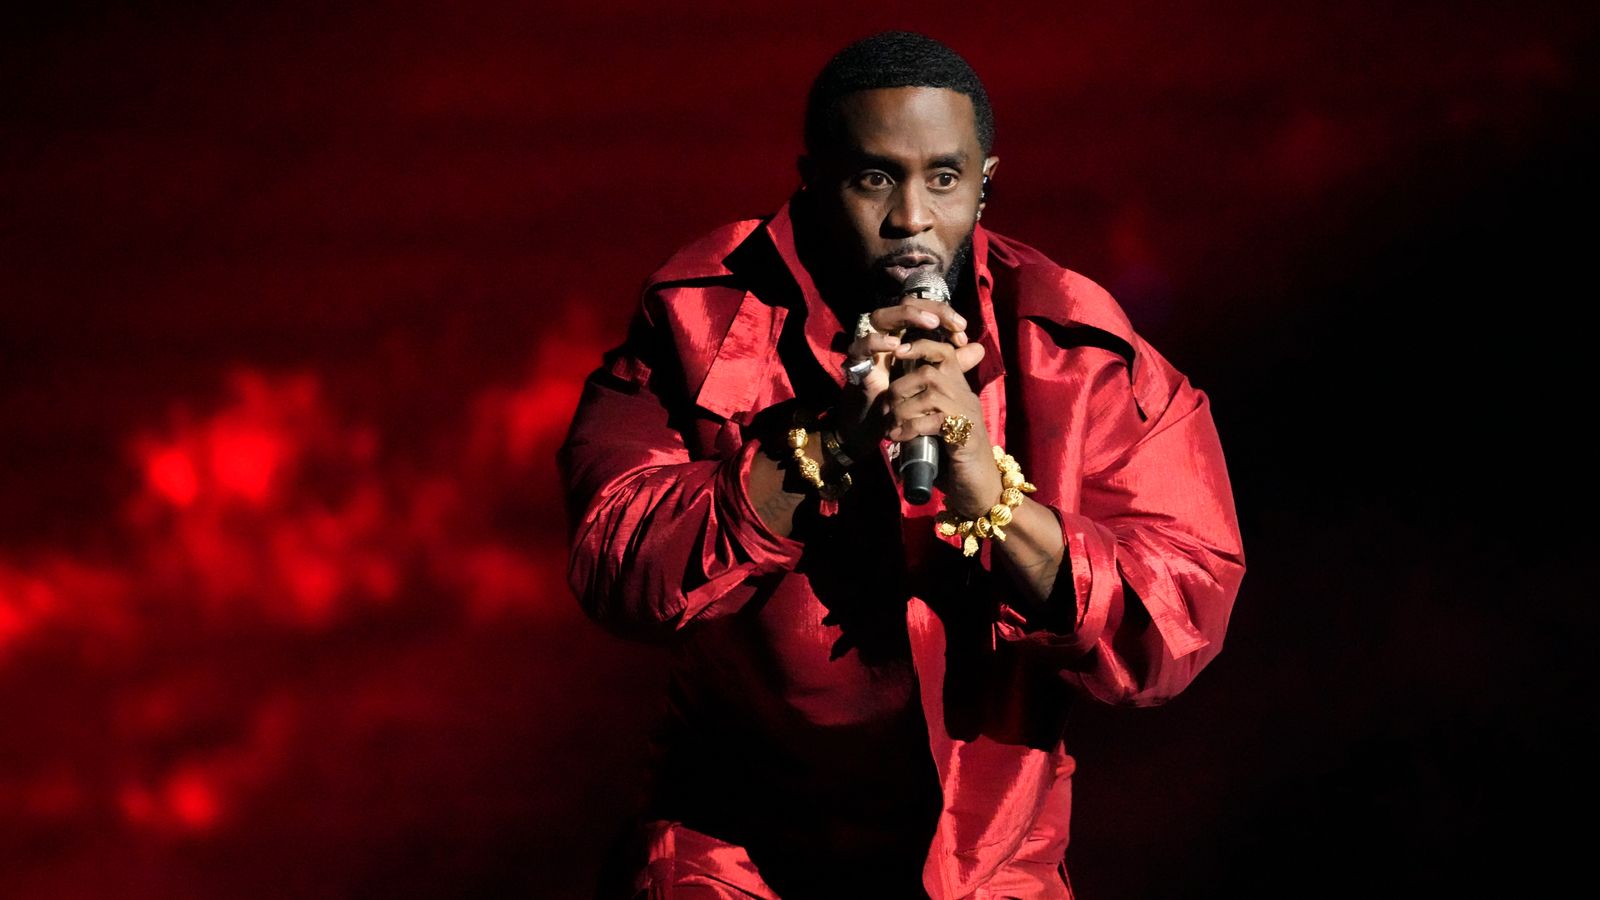 P Diddy: What is Sean Combs accused of and what has he said?